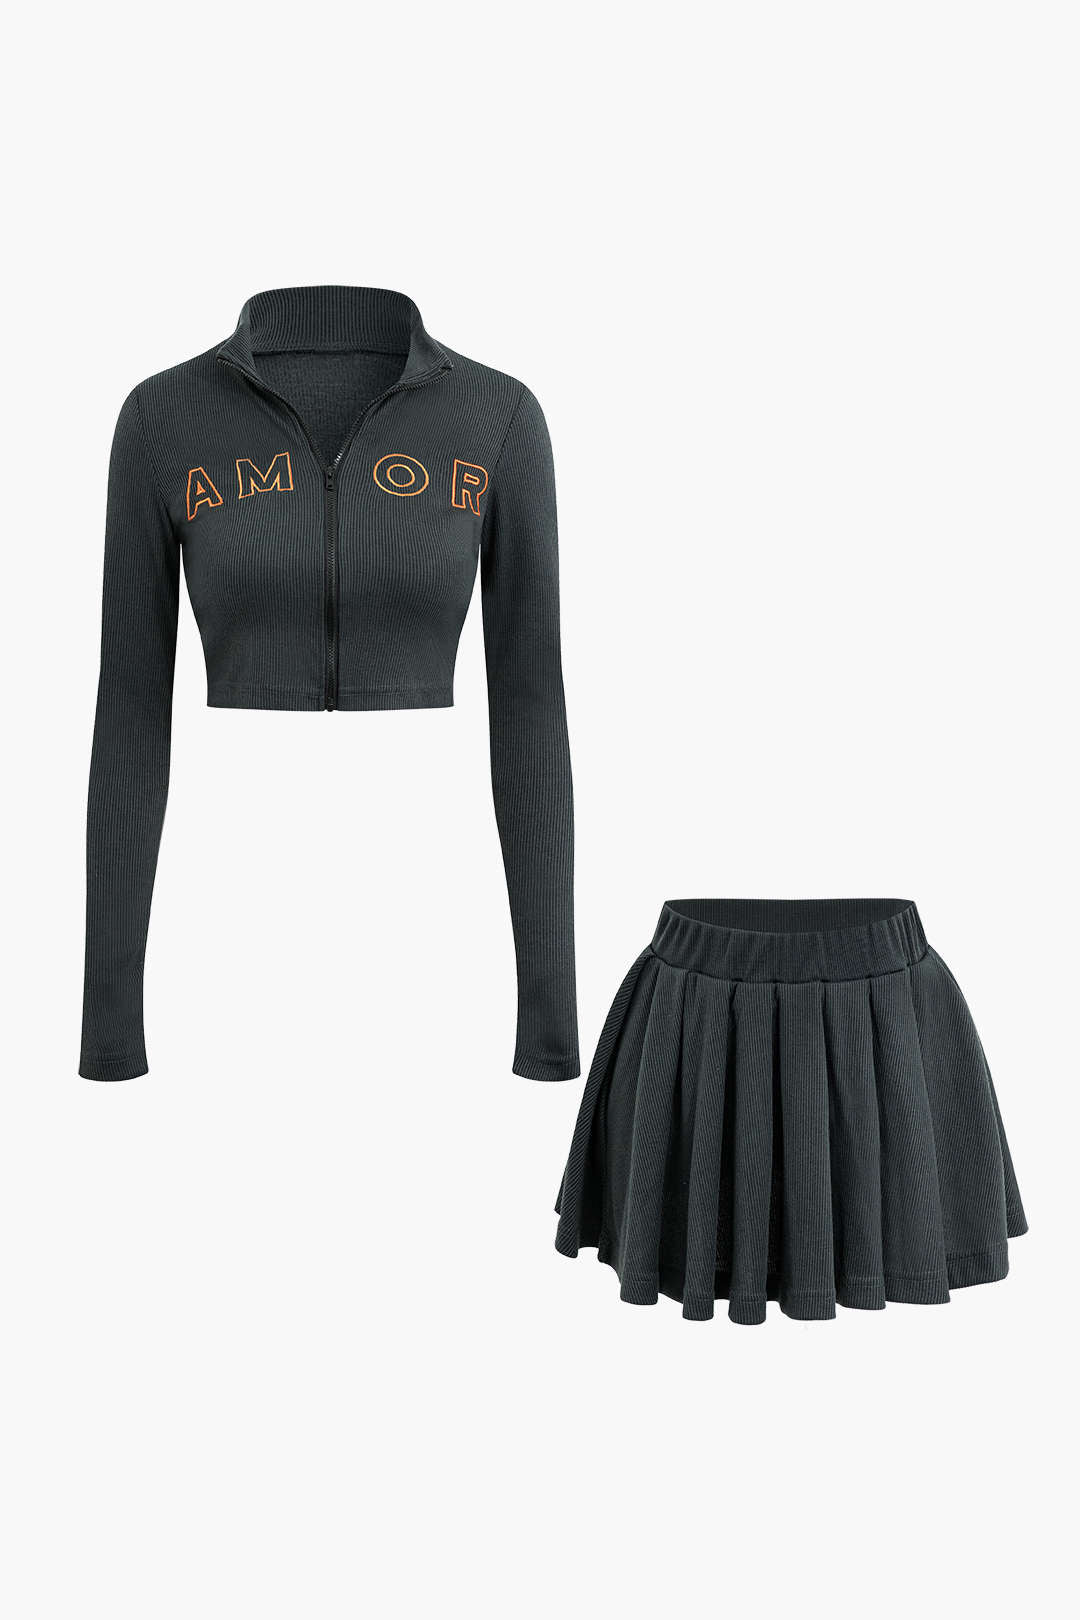 Letter Embroidered Rib Knit Stand Collar Zipper Crop Cardigan And Pleated Mini Skirt Set